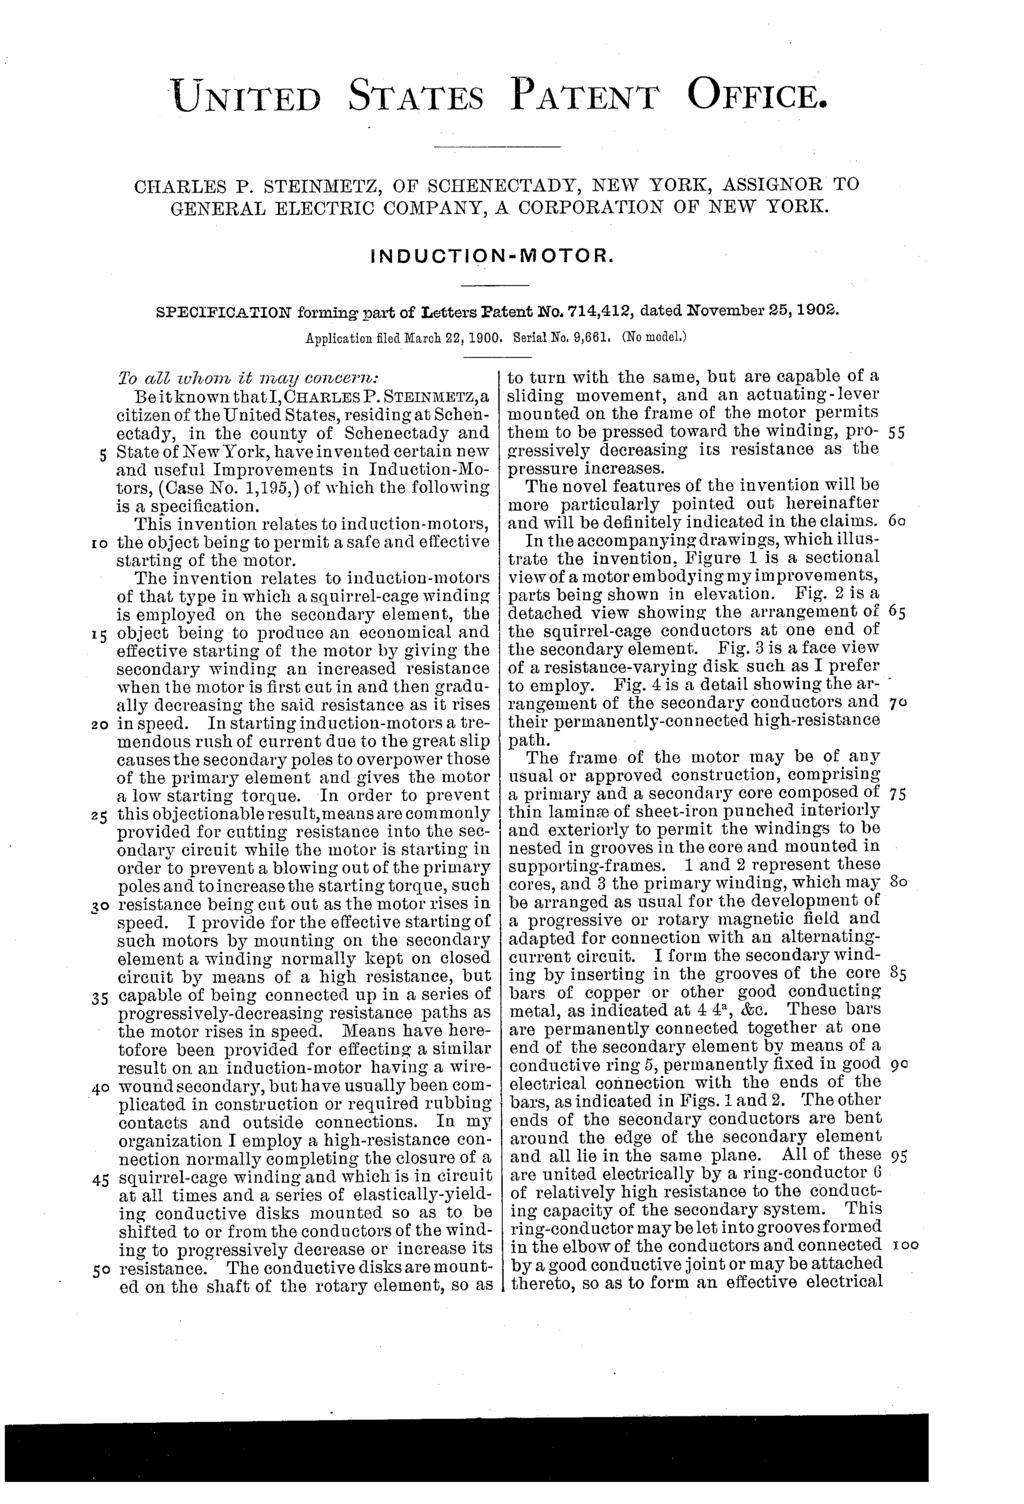 UNITED STATES PATENT FFICE. CHARLES P. STEINMETZ, F SCHENECTADY, NEW YRK, ASSIGNR T GENERAL ELECTRIC CMPANY, A CRPRATIN F NEW YRK. NDUCT N - MTR. 15 So SPECIFICATIN forming part of Tetters Patent No.